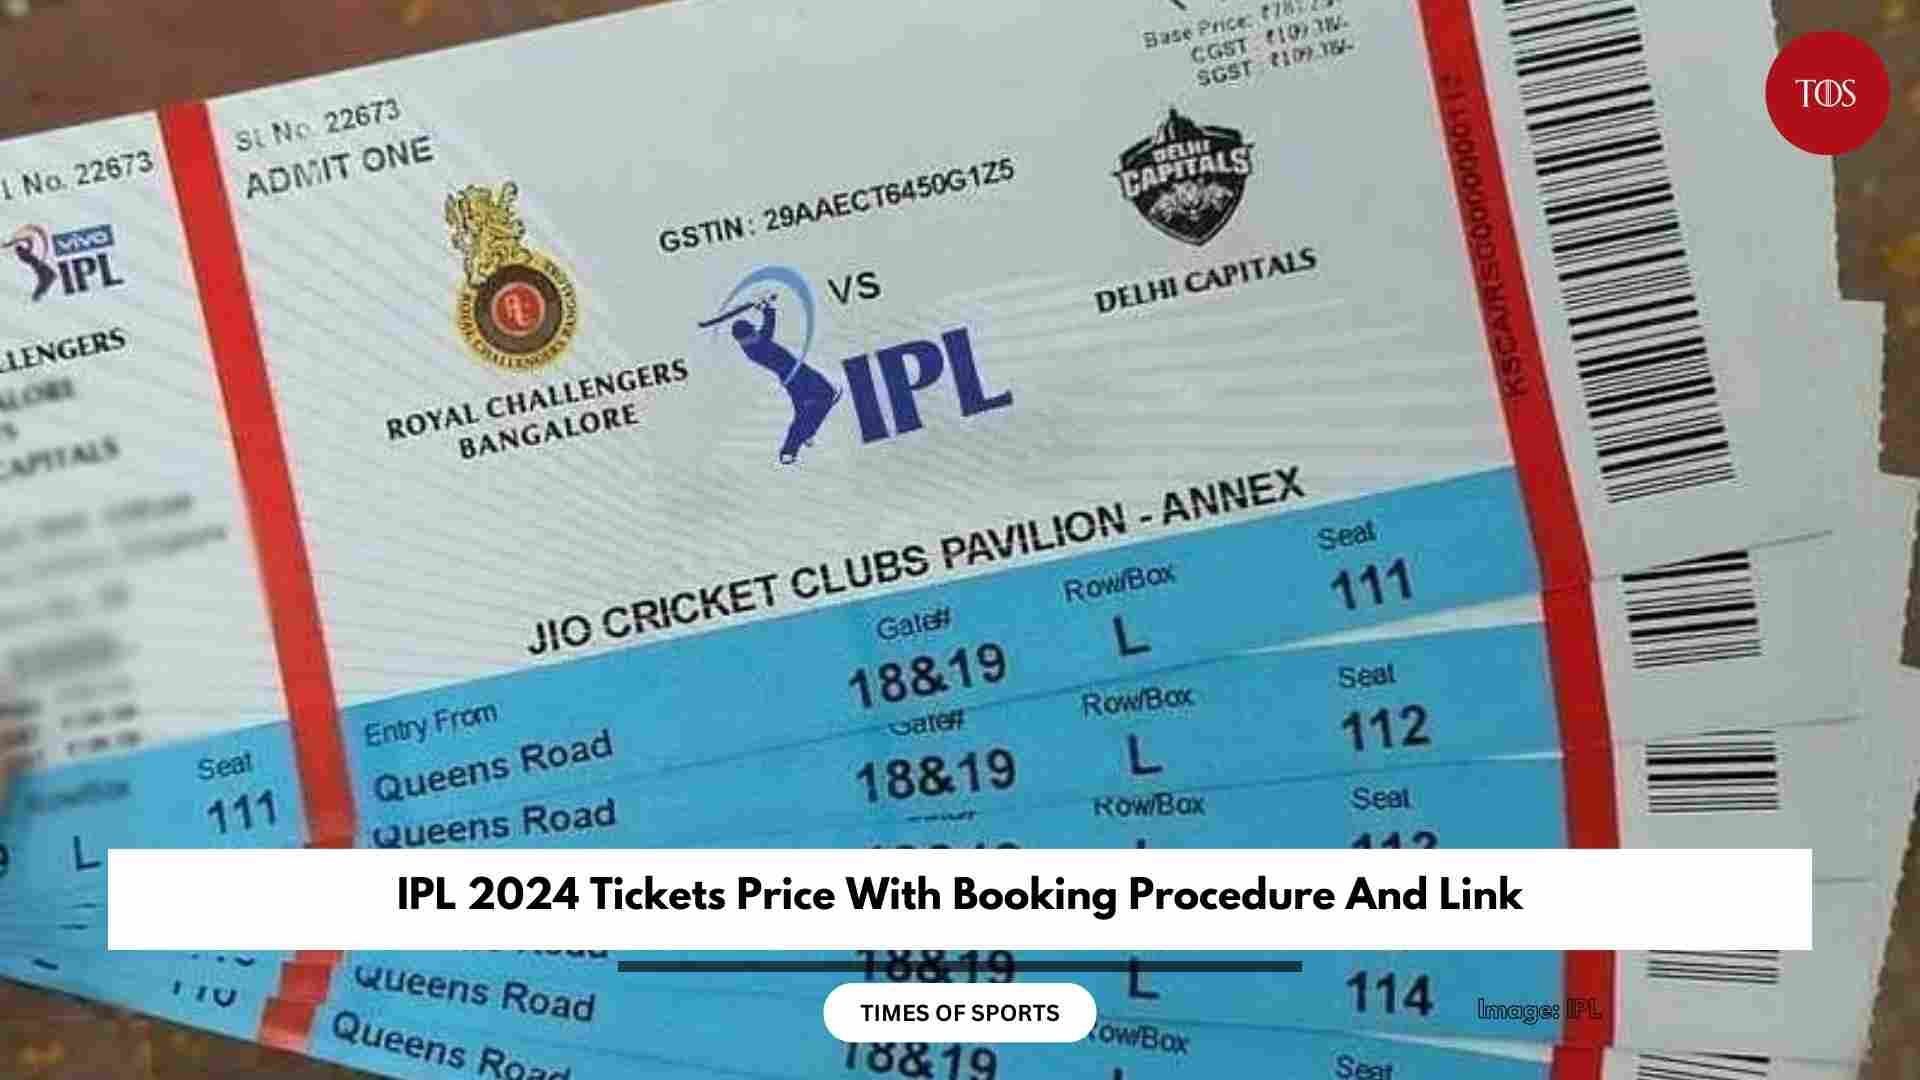 IPL 2024 Tickets Price With Booking Procedure And Link